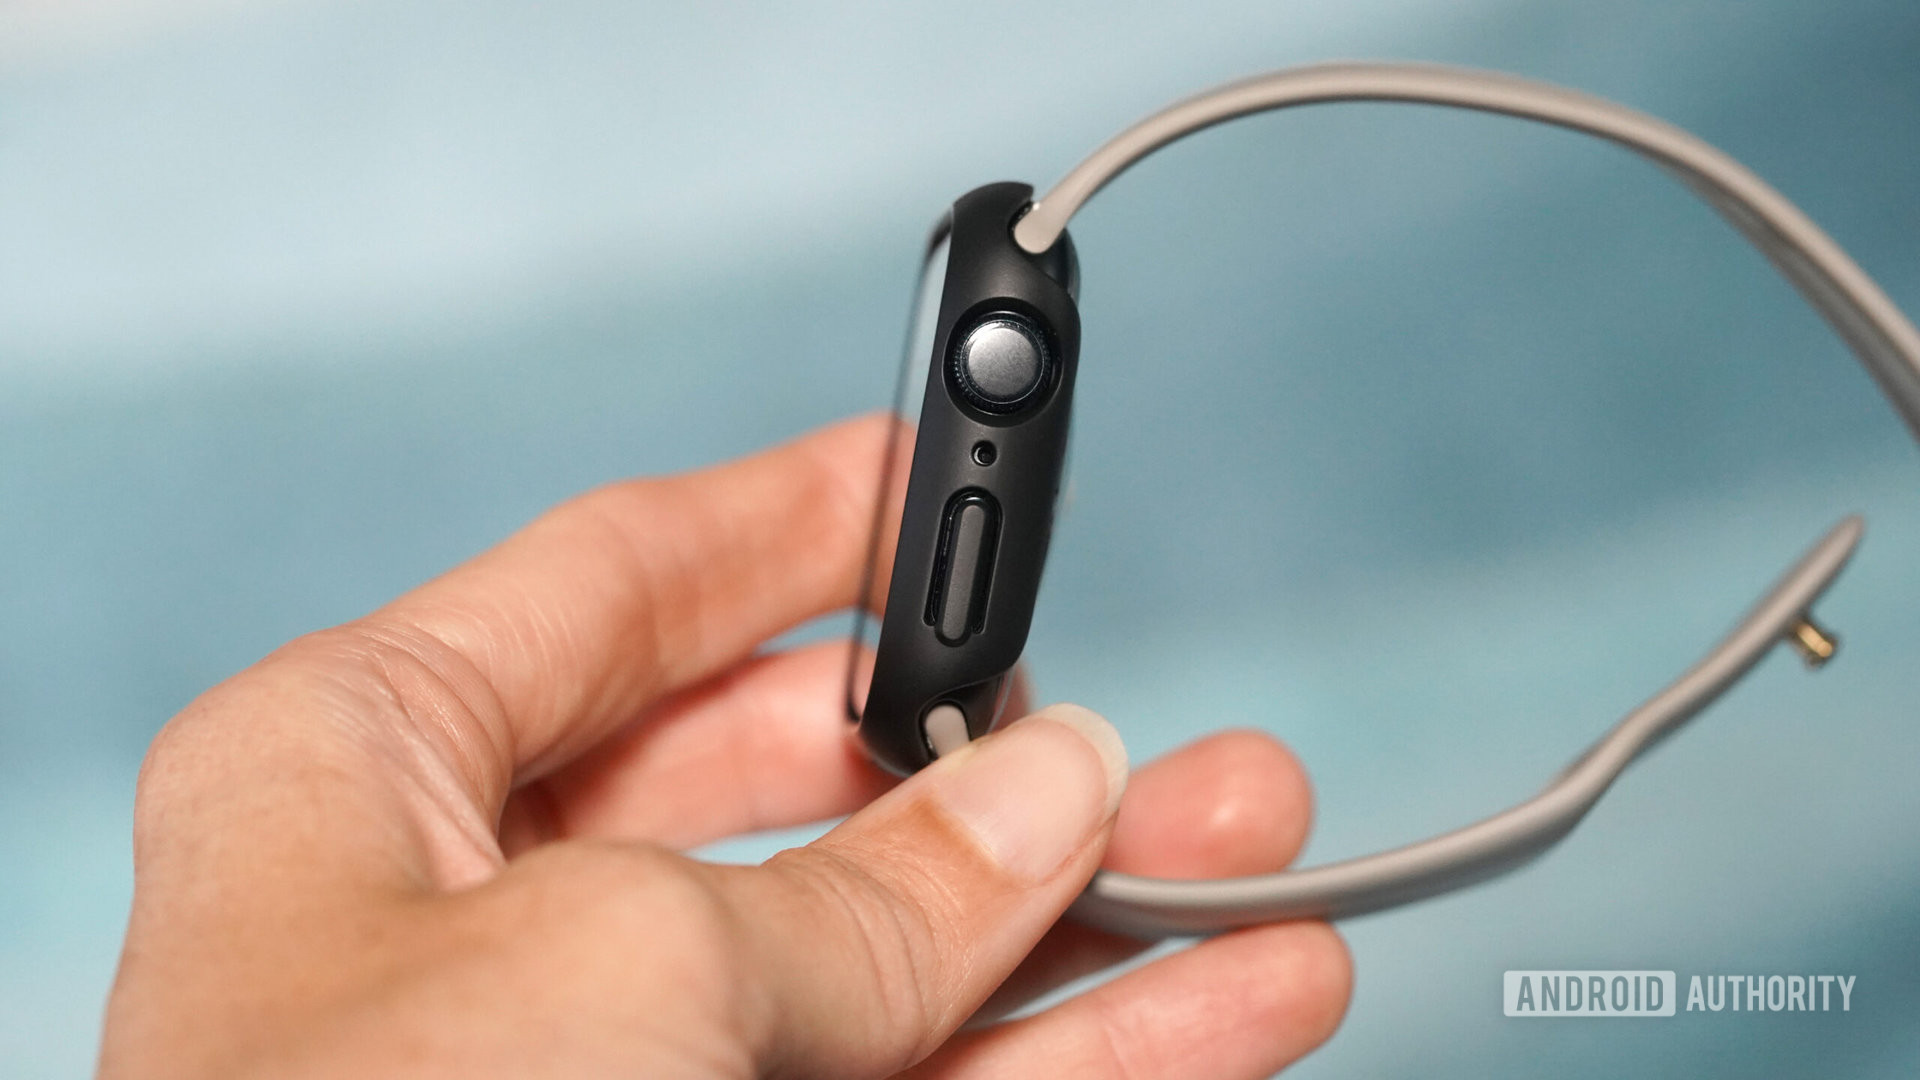 The Spigen Thin Fit case features a precise cutout for the Apple Watch Digital Crown.